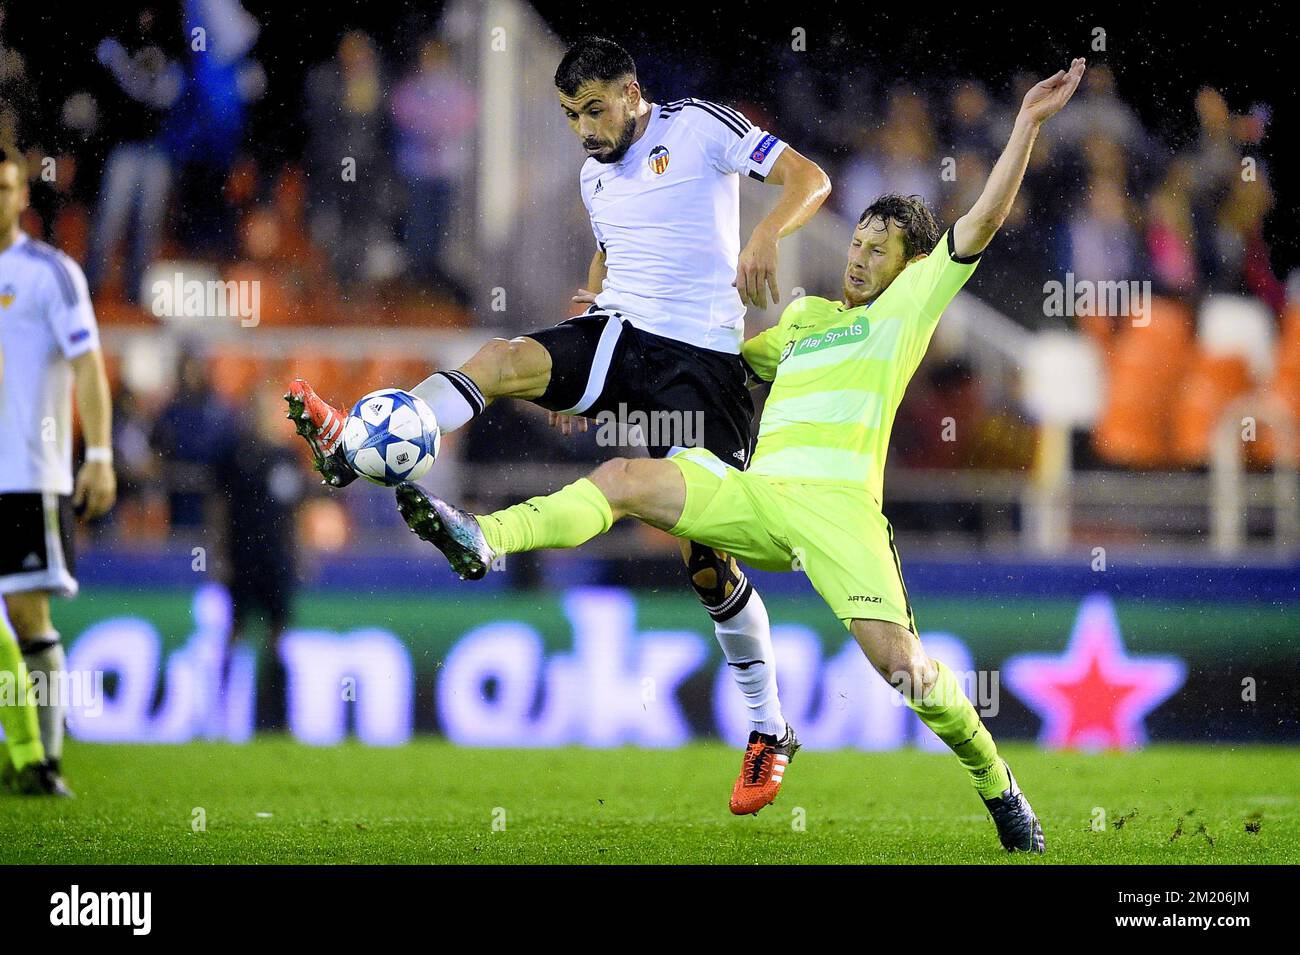 20151020 - VALENCIA, SPAIN: Valencia's Javi Fuego and Gent's Thomas Matton fight for the ball during a soccer game between Spanish club Valencia CF and Belgian team KAA Gent in Valencia, Spain, Tuesday 20 October 2015, game three in group H of the group stage of the UEFA Champions League tournament. BELGA PHOTO YORICK JANSENS Stock Photo